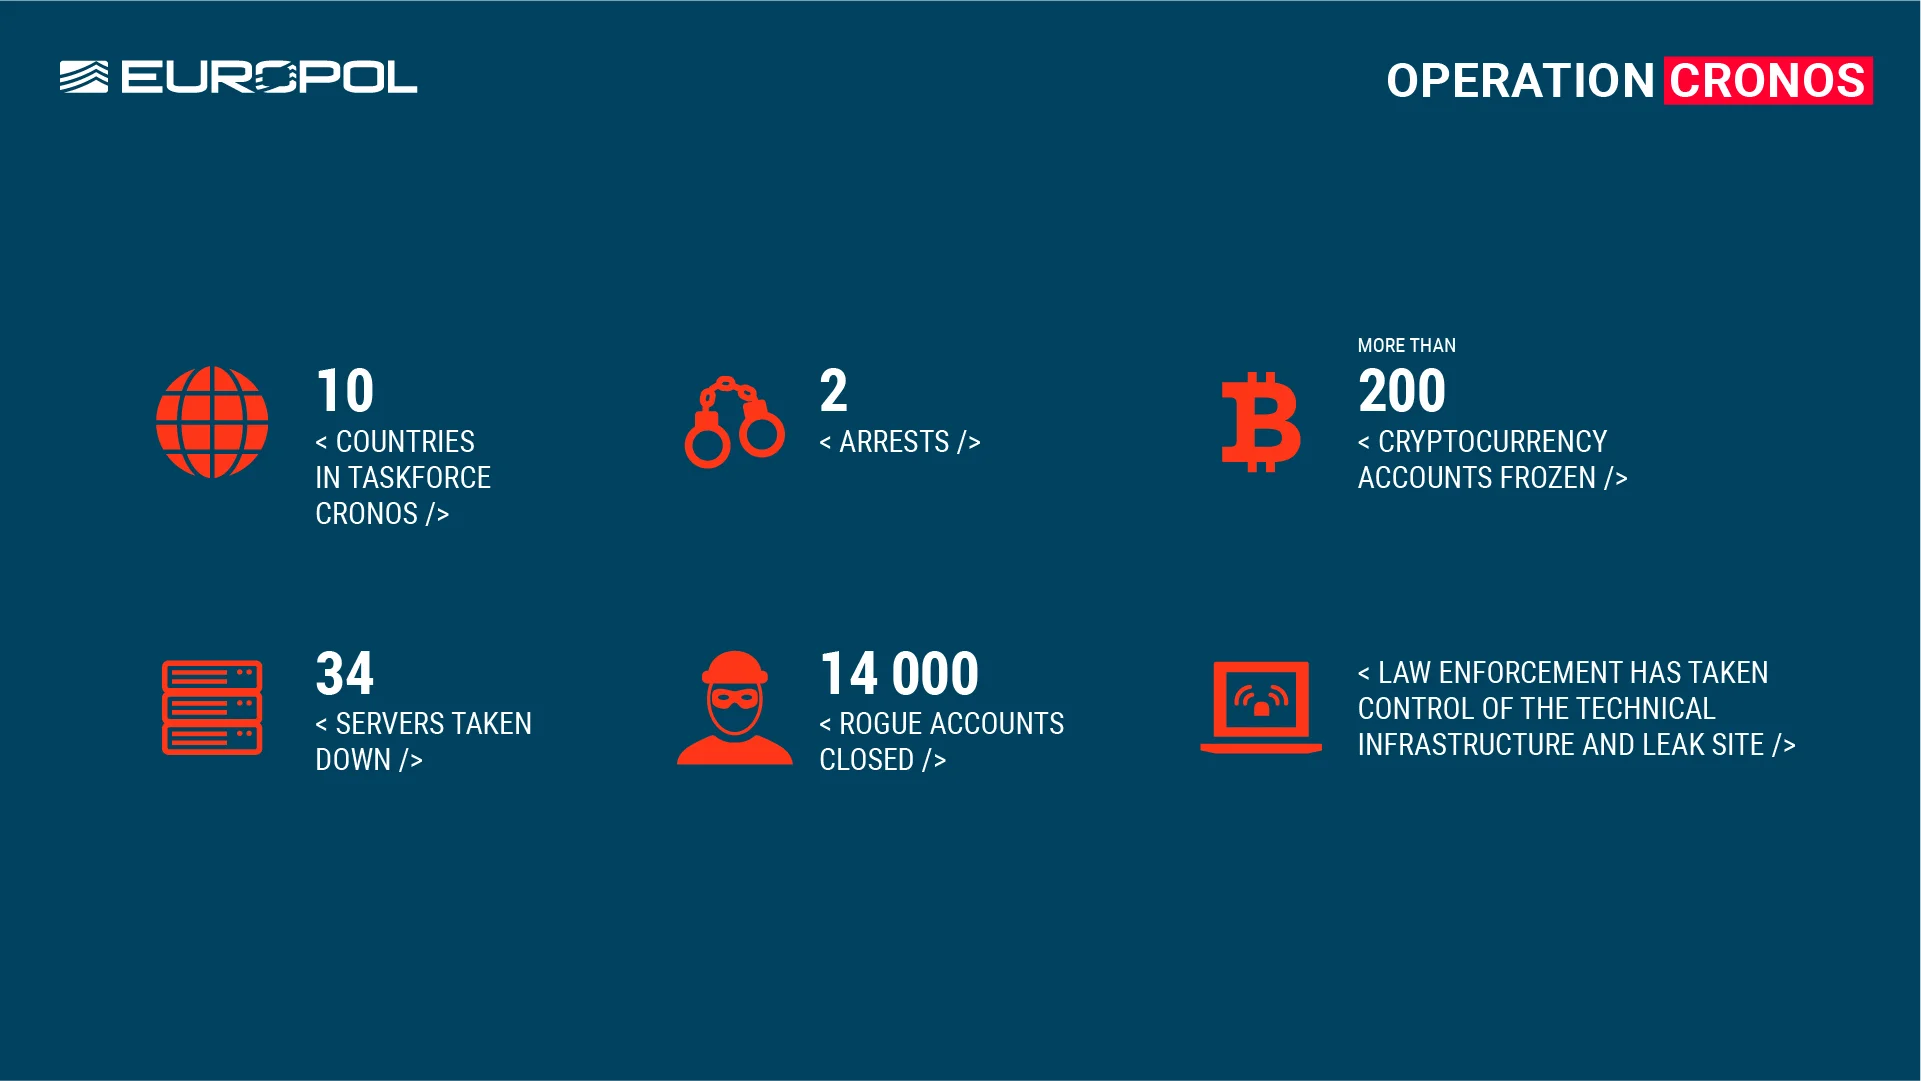 Europol’s infographic about the Operation Cronos